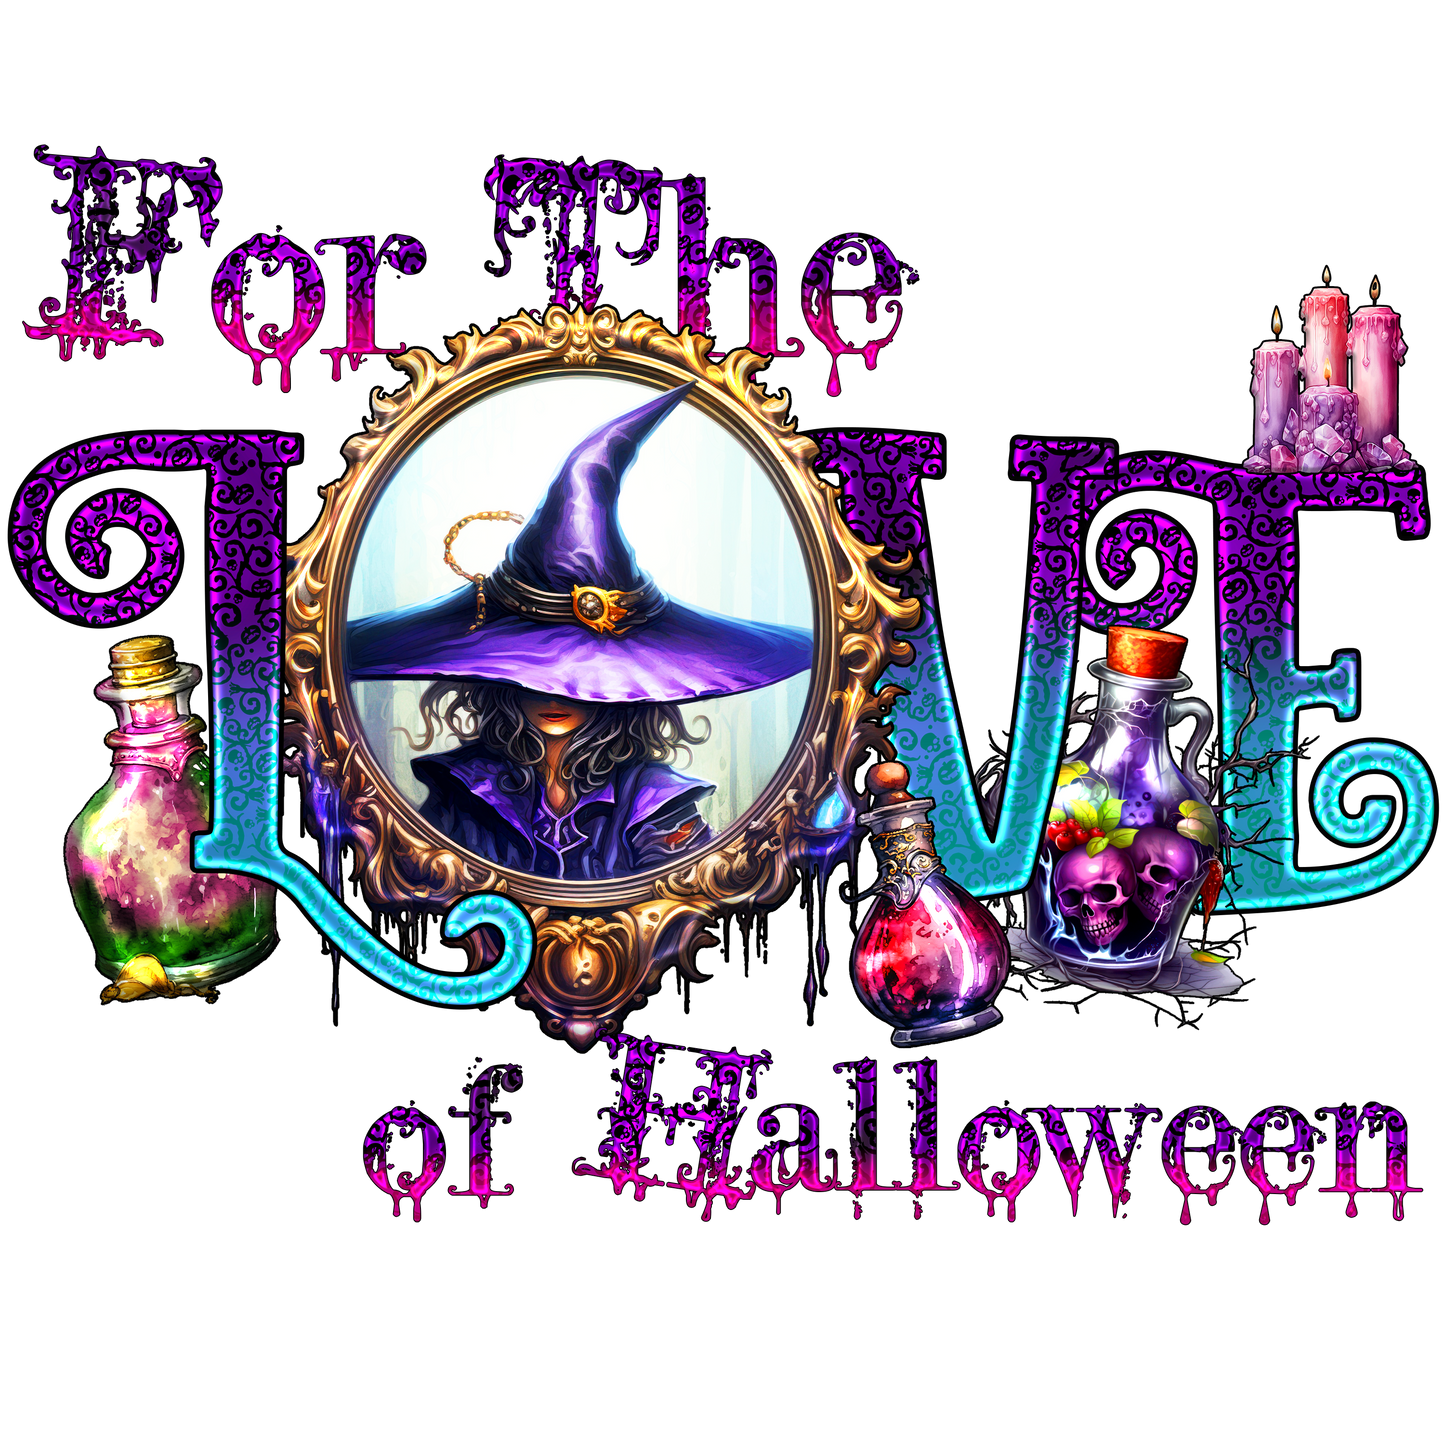 FOR THE LOVE OF HALLOWEEN